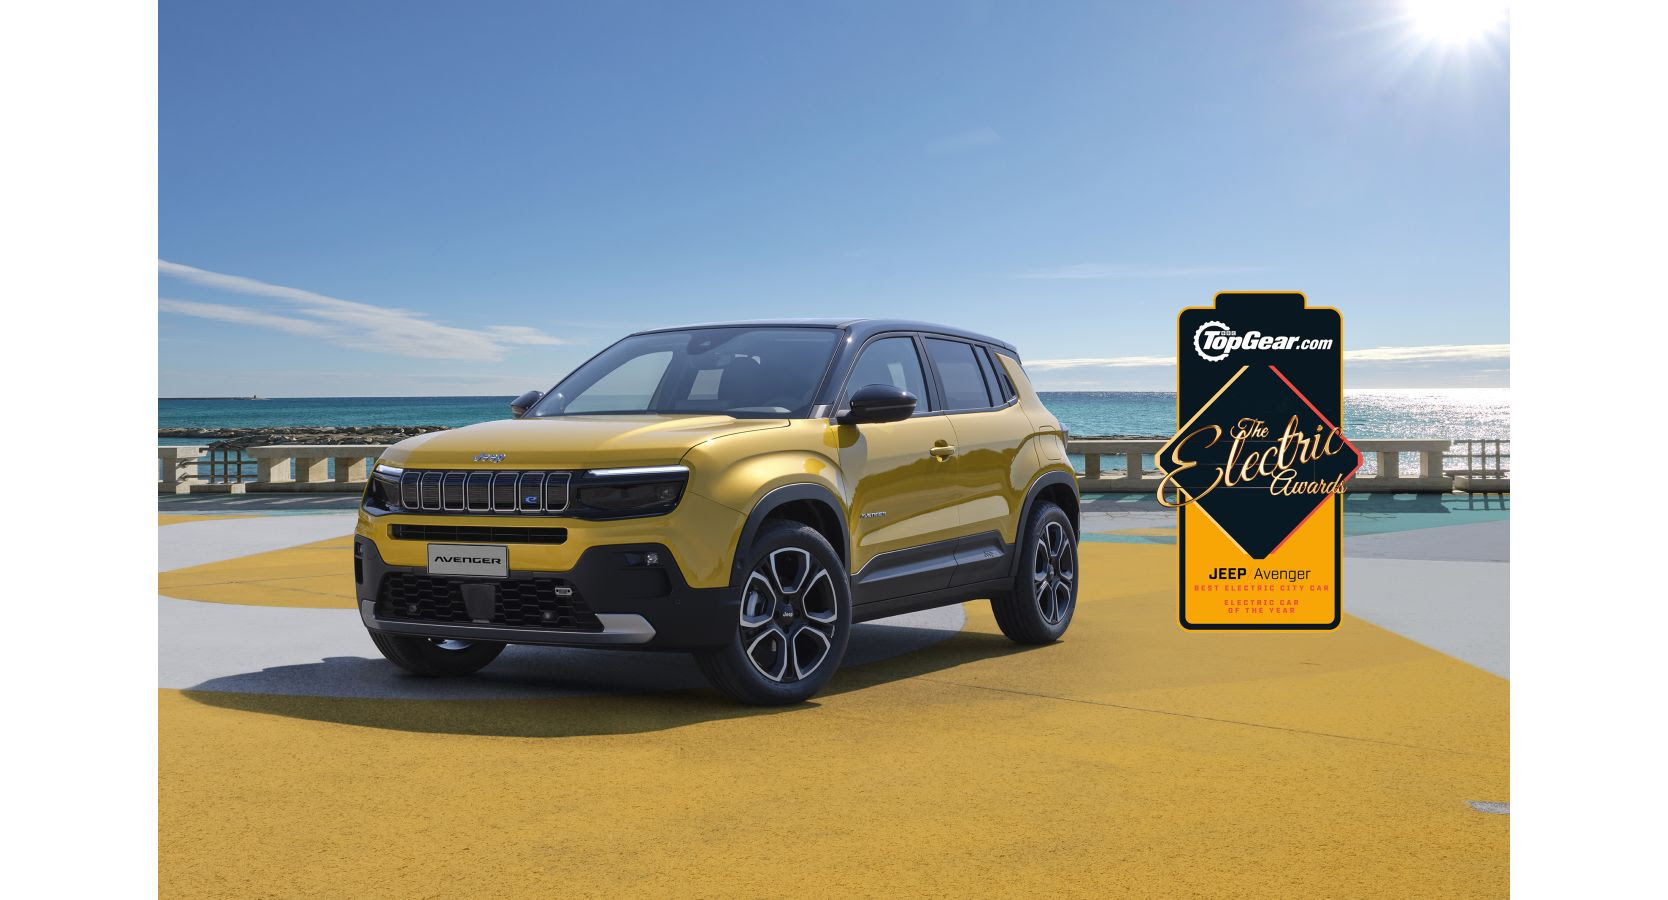 Top Gear Declares the Jeep Avenger Electric Car of the Year - Expedition  Portal